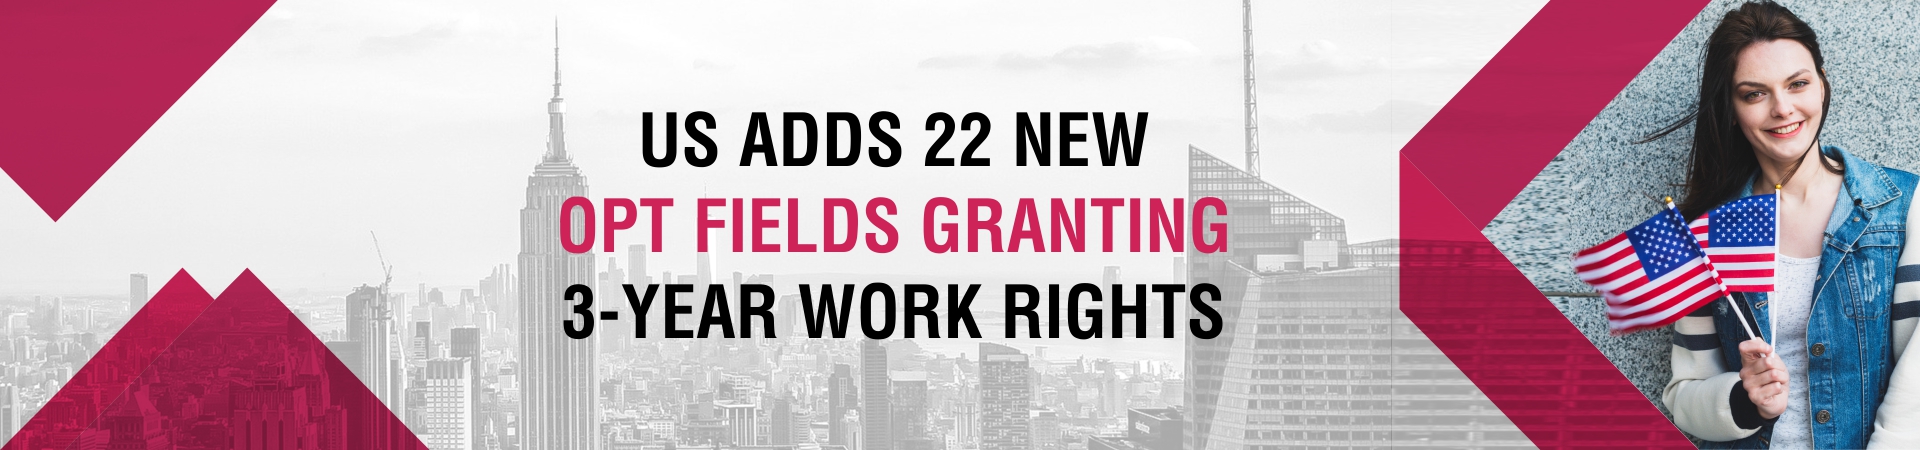 US adds 22 new OPT fields granting 3-year work rights